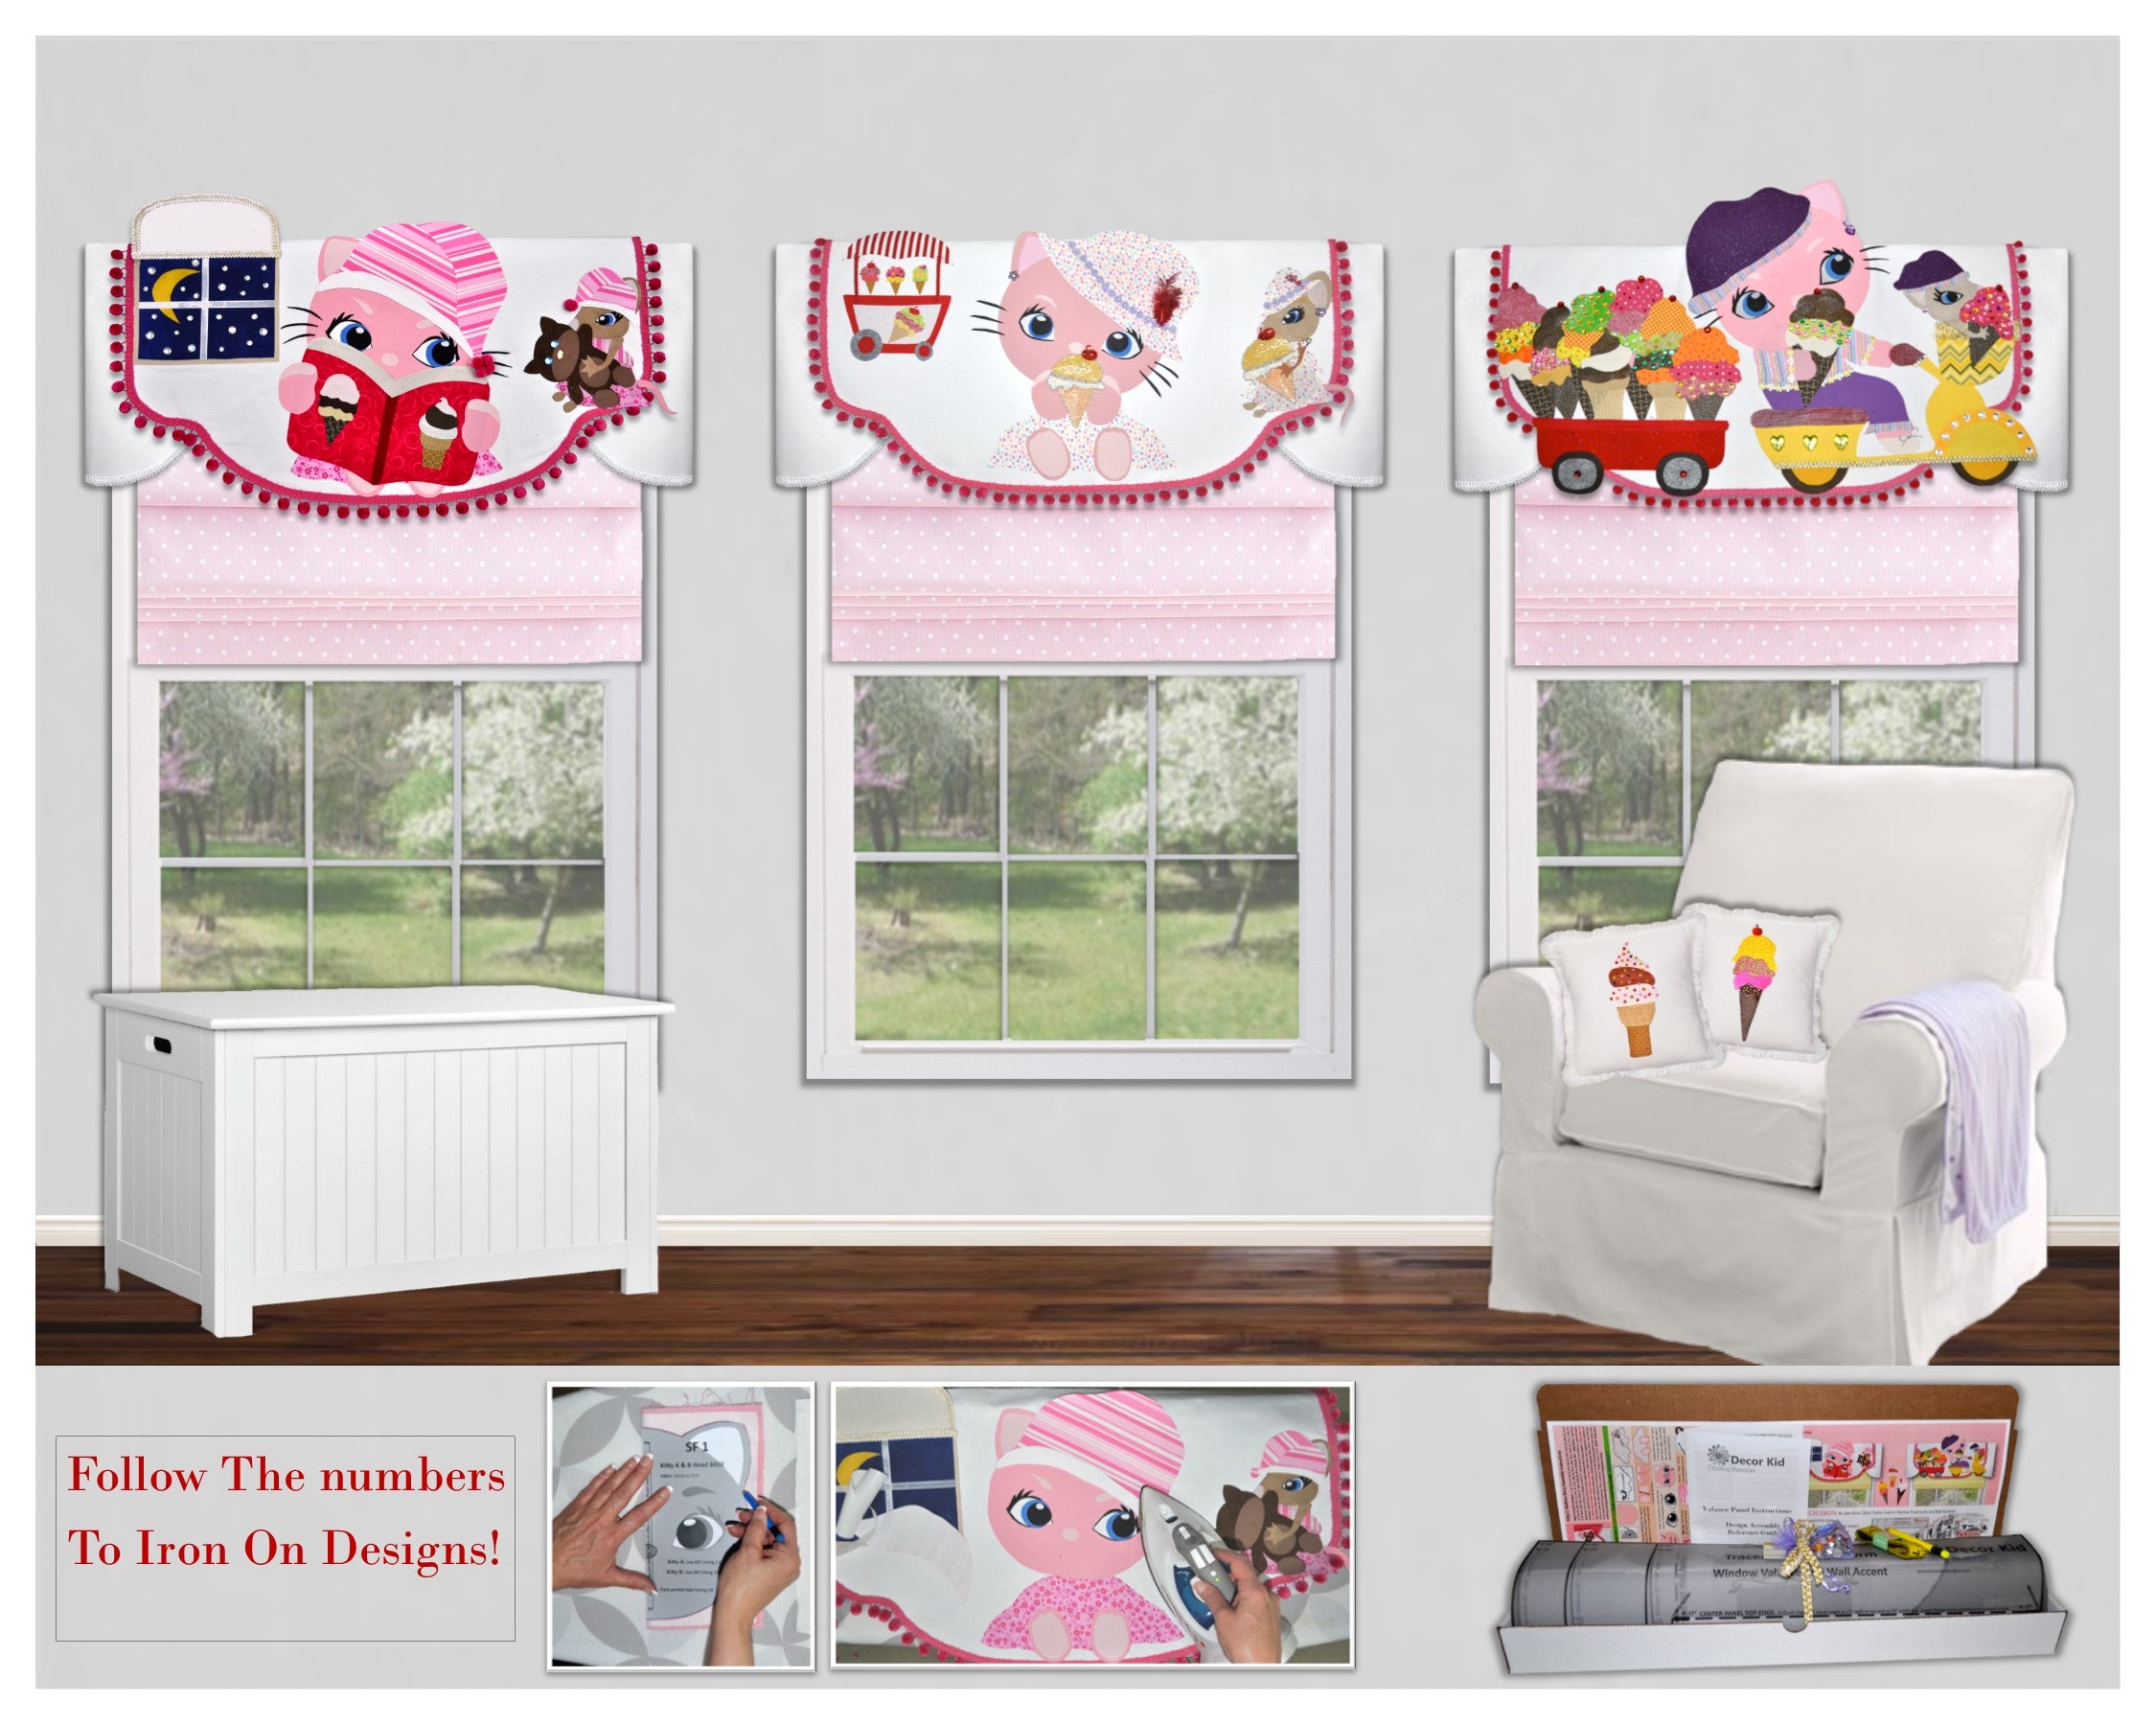 Traceable Designer girls room decorating kit, no-sew kitty valances and wall accents